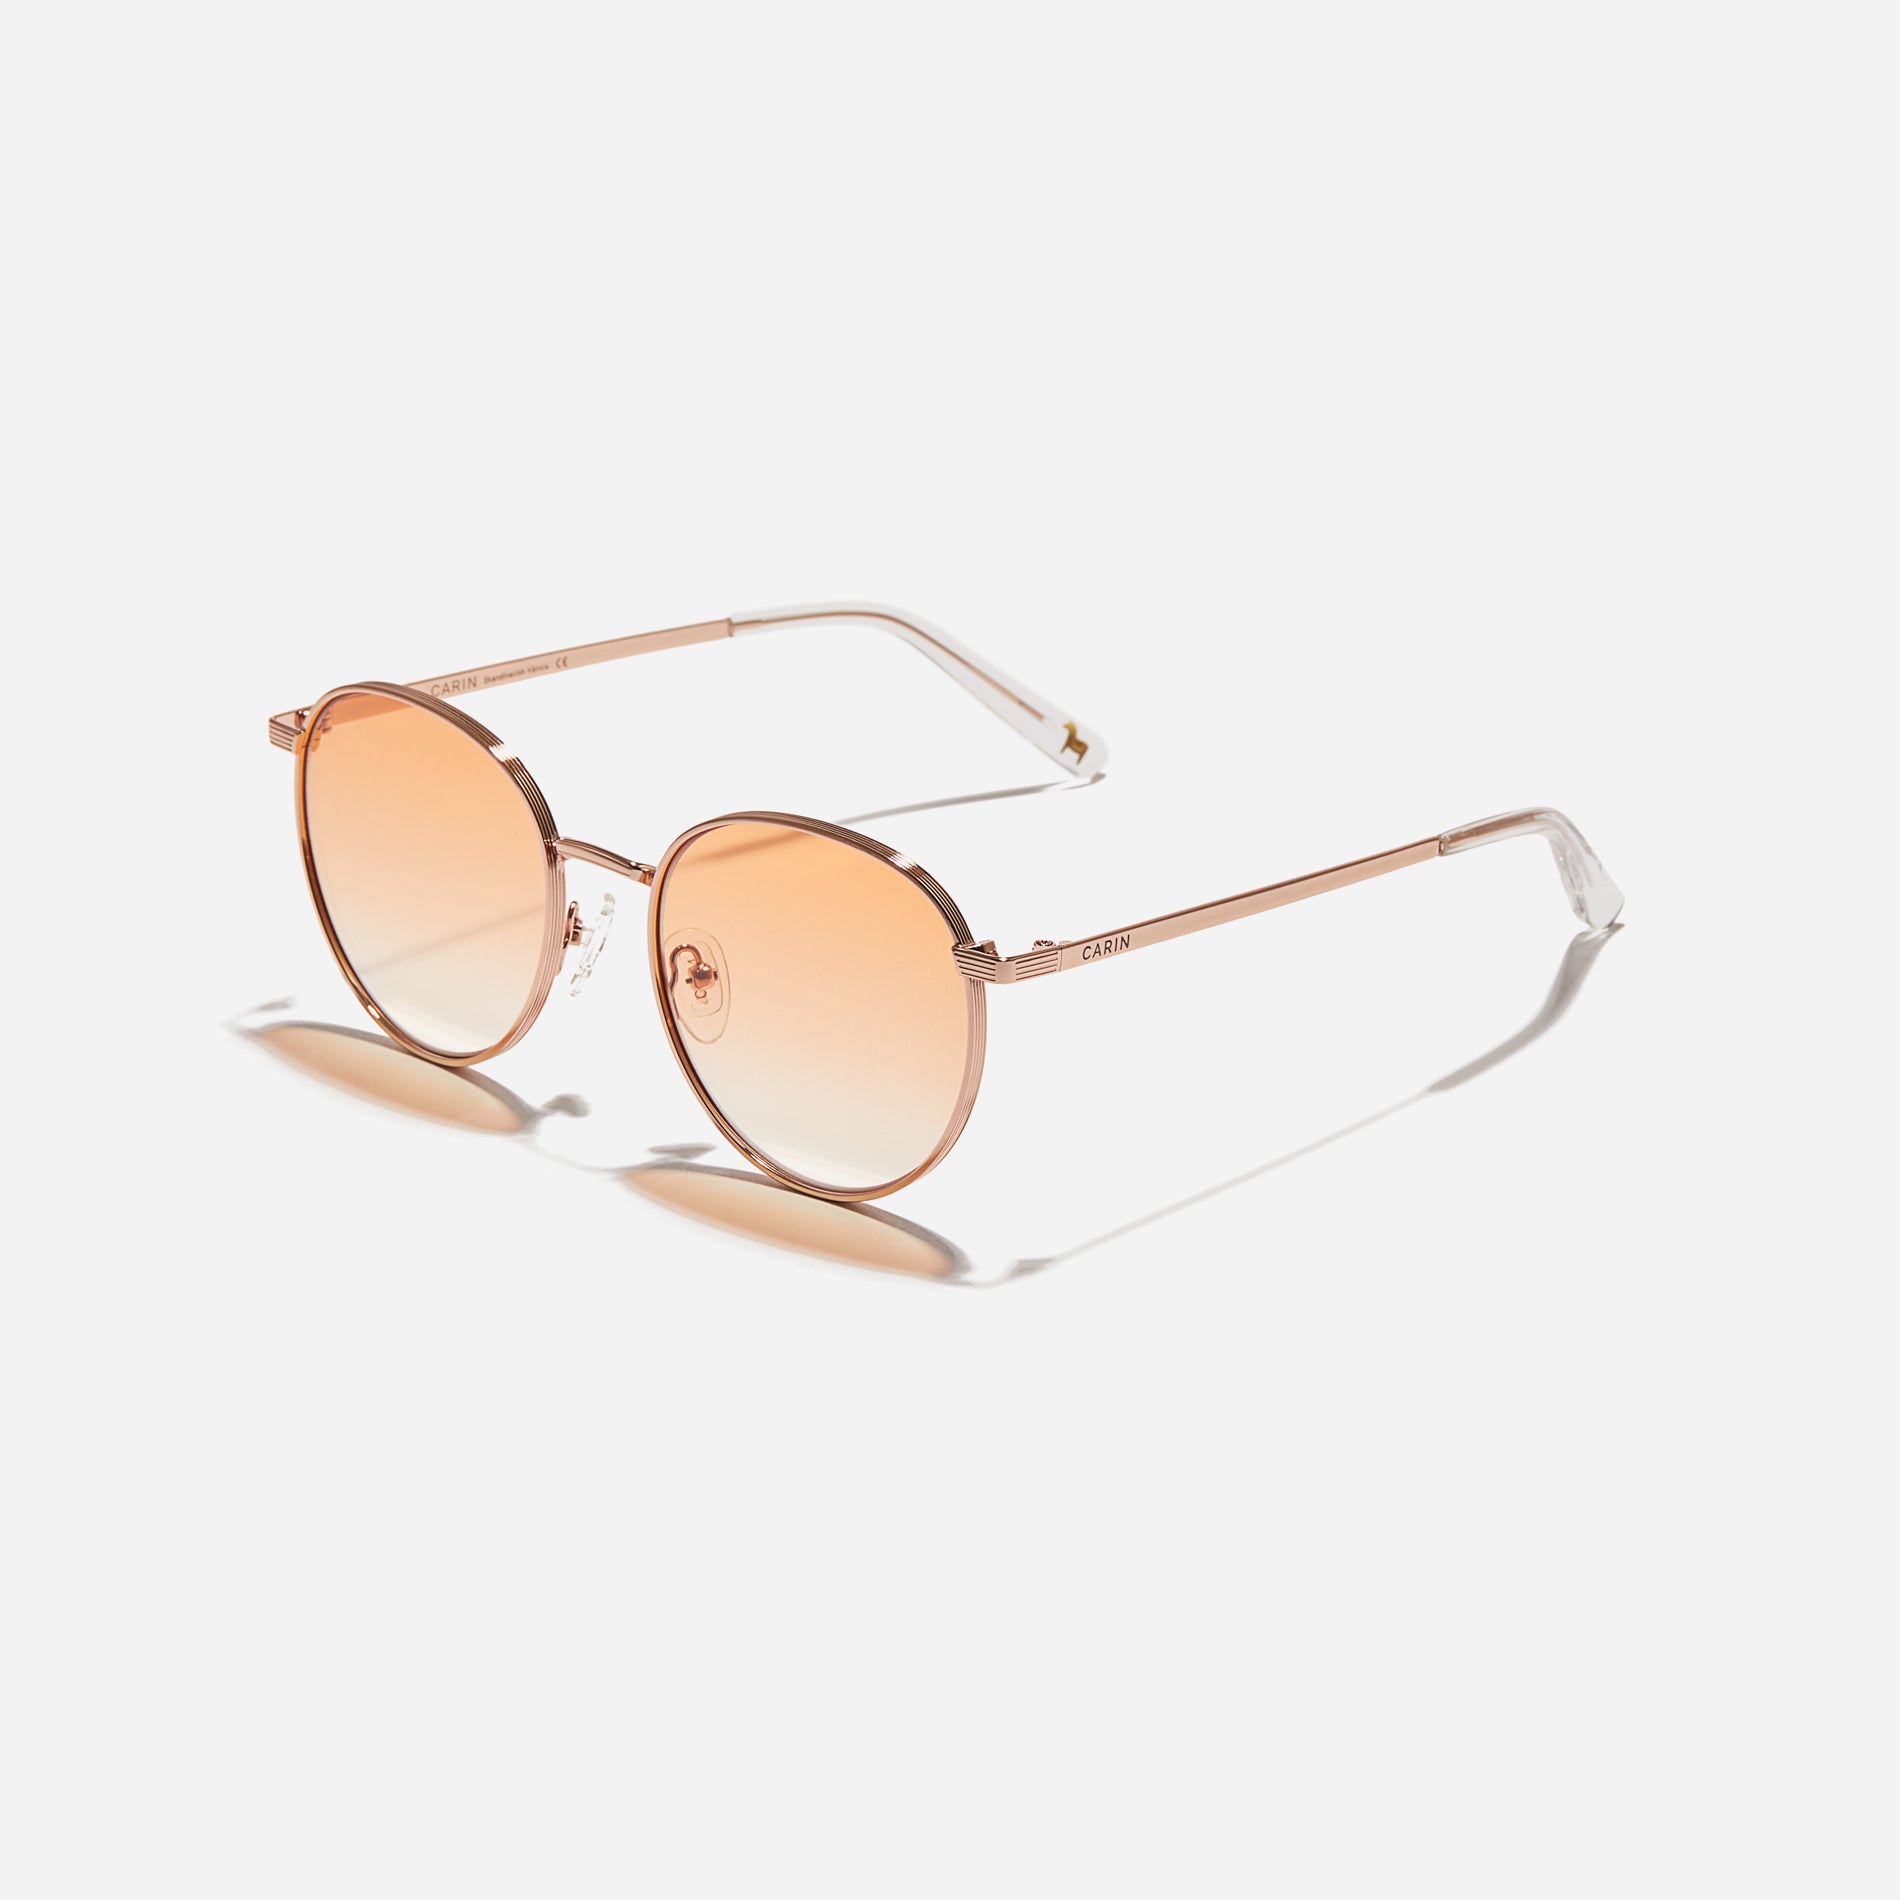 Boeing-style sunglasses featuring chic temple details and half-mirrored lens coating that reduces glare and provides 100% UV protection.